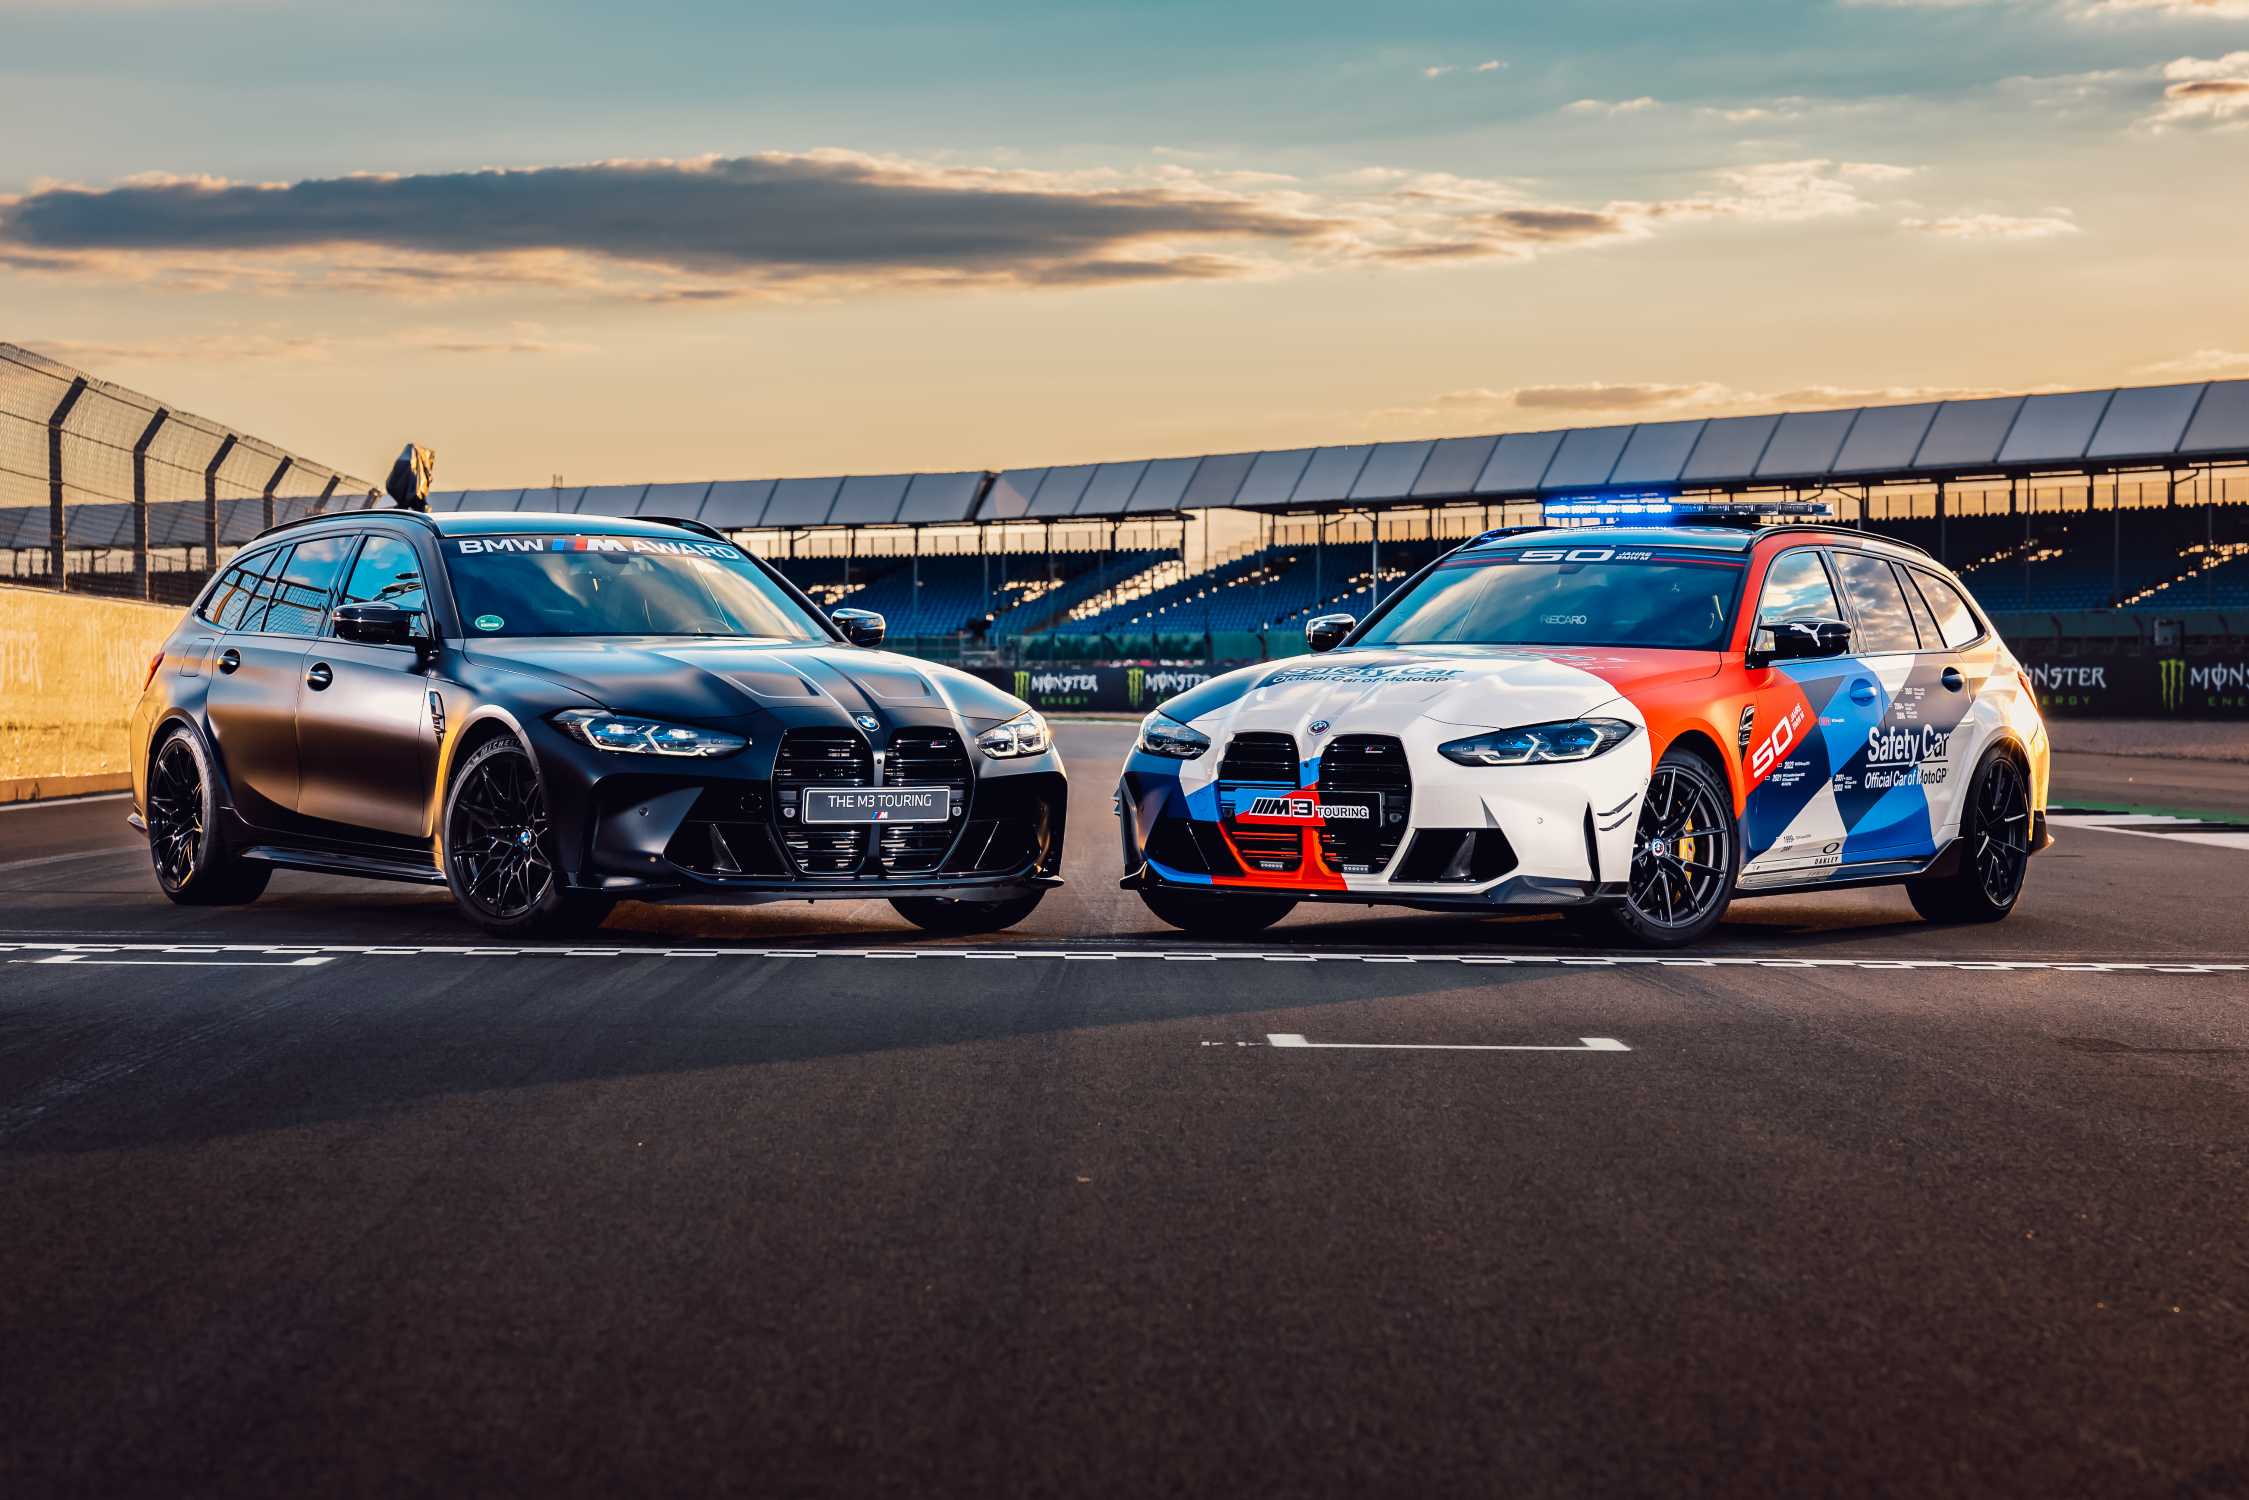 Silverstone (GBR), 5th August 2022. BMW M GmbH, 2022 BMW M Award, MotoGP™. Winner's car BMW M3 Competition Touring with xDrive, BMW M3 Touring MotoGP™ Safety Car.